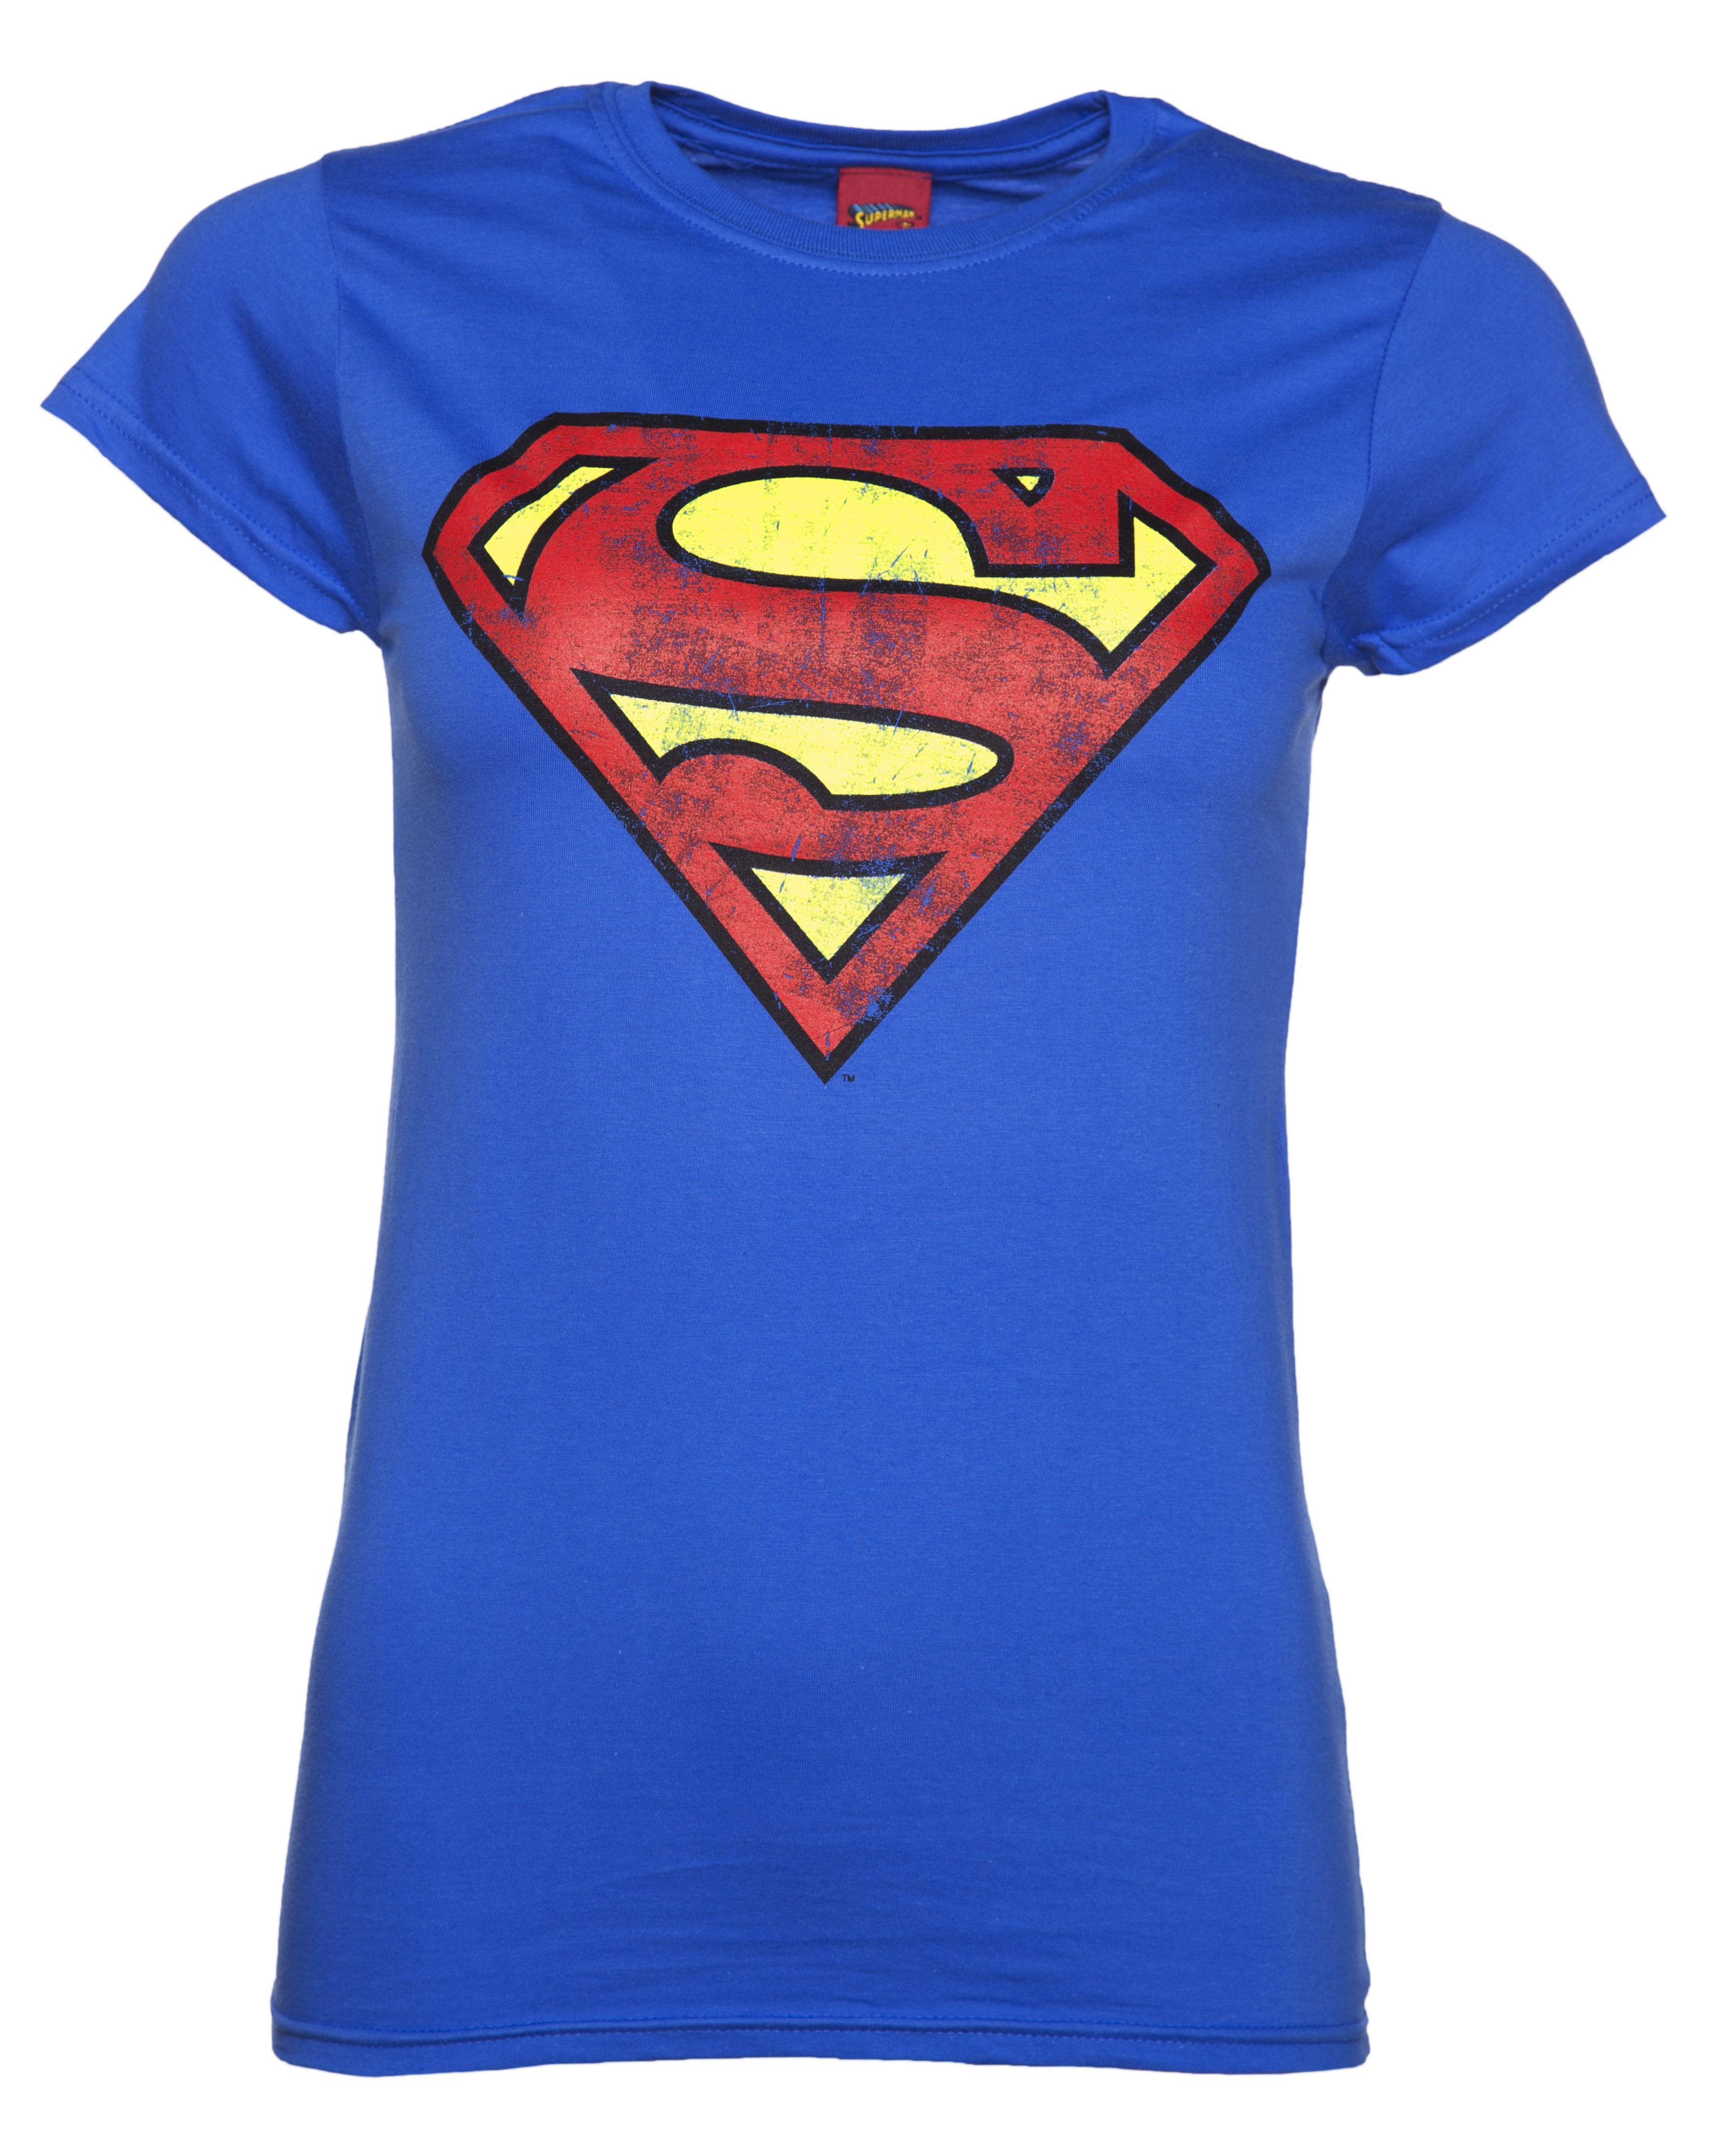 Distressed Superman Logo - Official Superman T Shirts, Tops, Accessories And Gifts